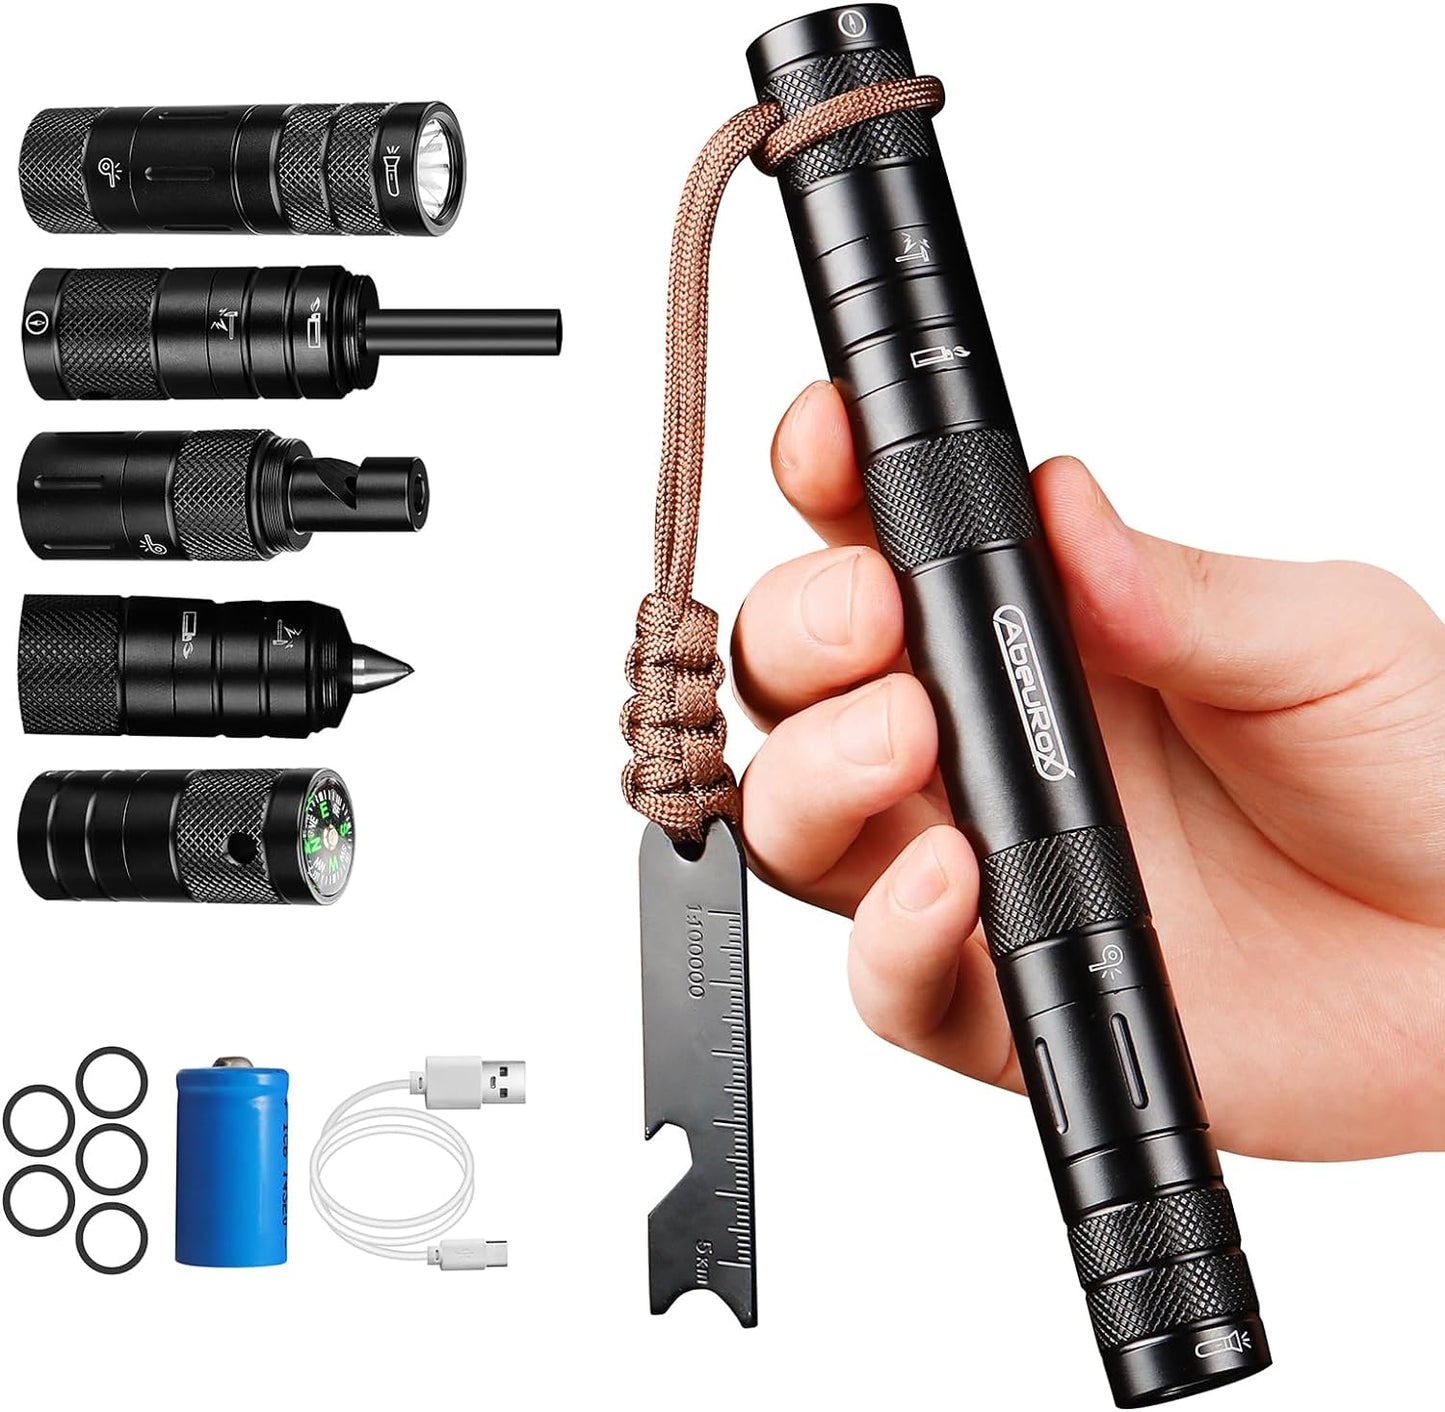 All in 1 Camping Survival Kits with LED Flashlight, Fire Starter, Whistle, Glass Breaker, Compass, Paracord, Tactical Survival Multitool, EDC, Stocking Stuffers and Gifts for Men Women